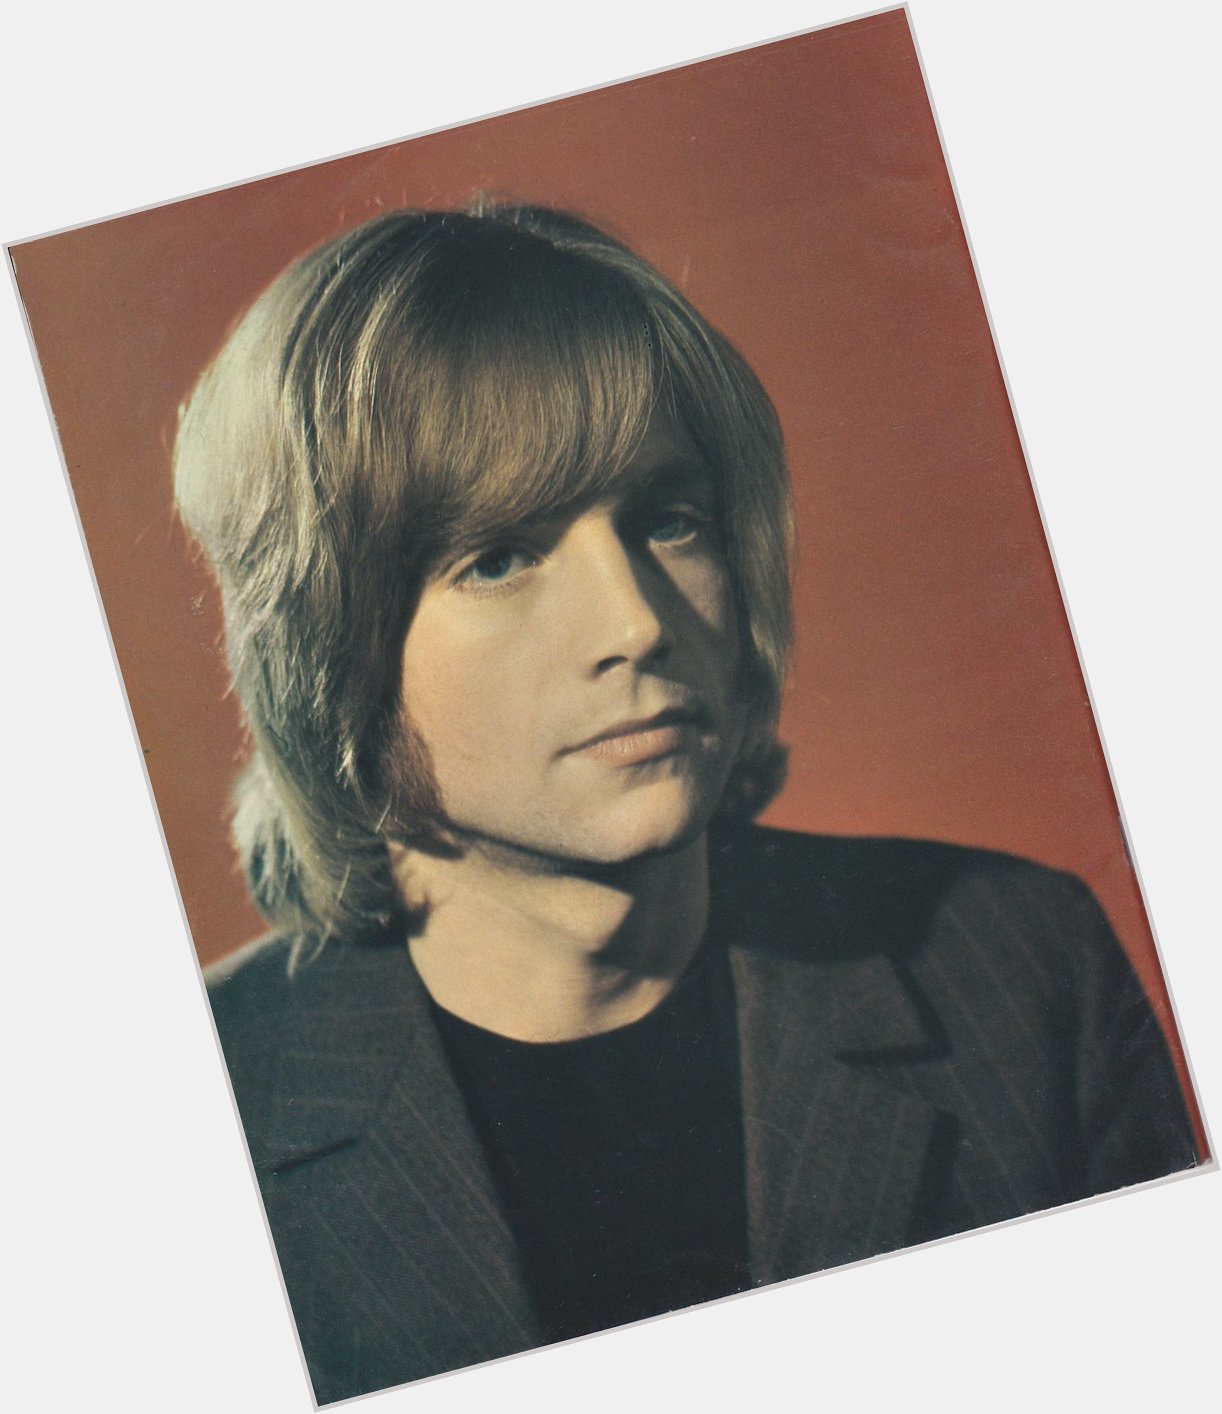 Still searching for the lost chord and R & R Hall of fame _ Justin Hayward is 71 today Happy Birthday 